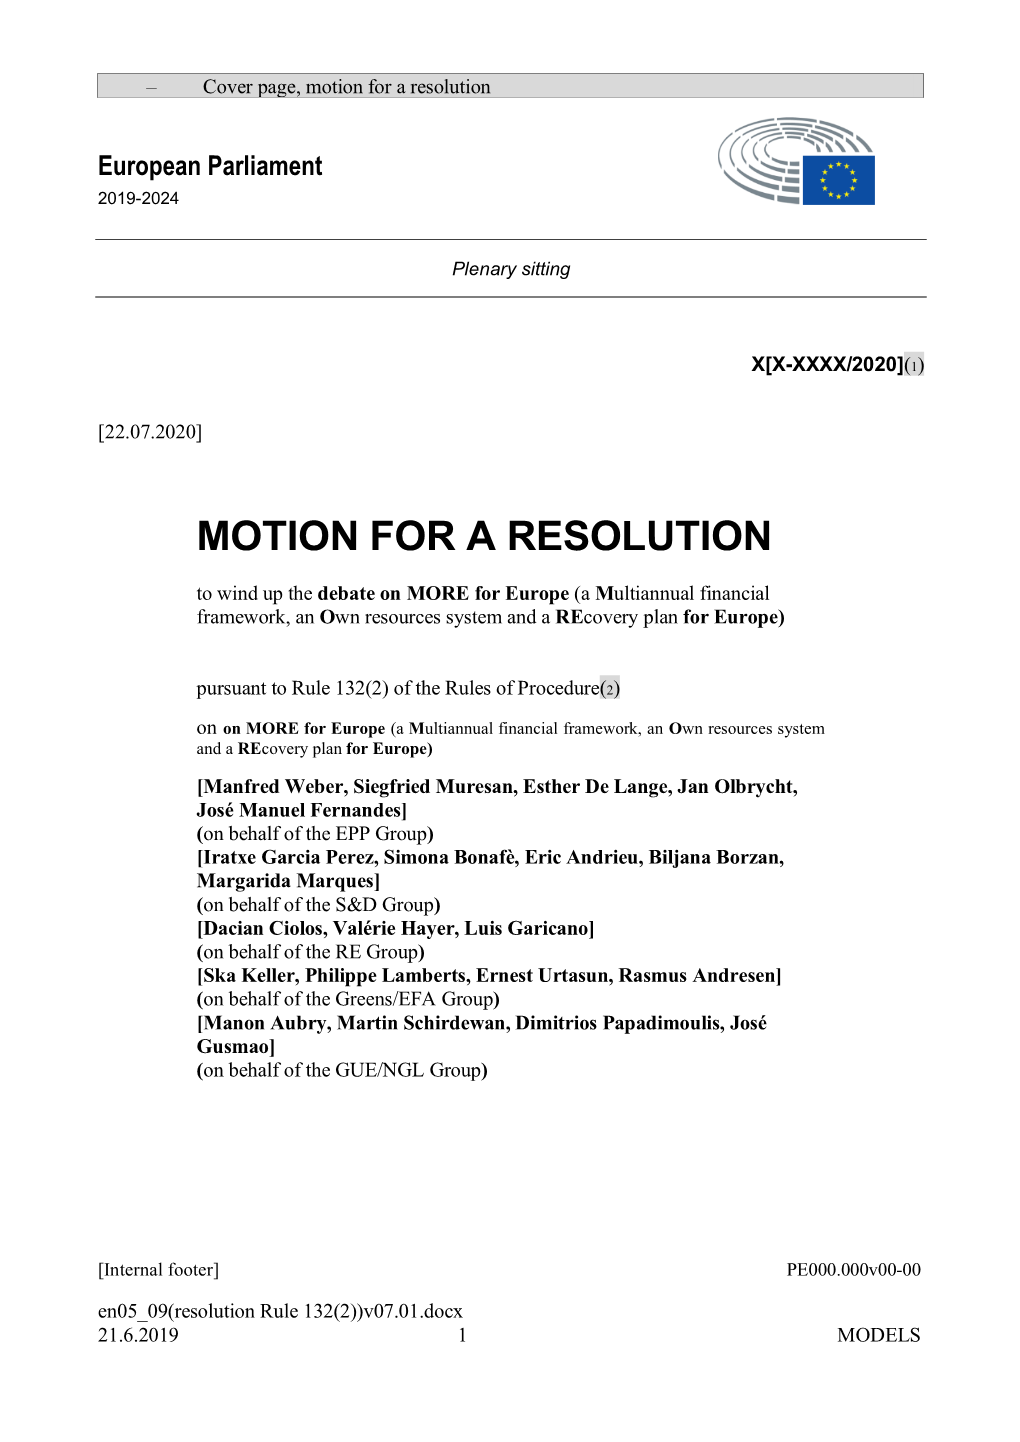 Motion for a Resolution